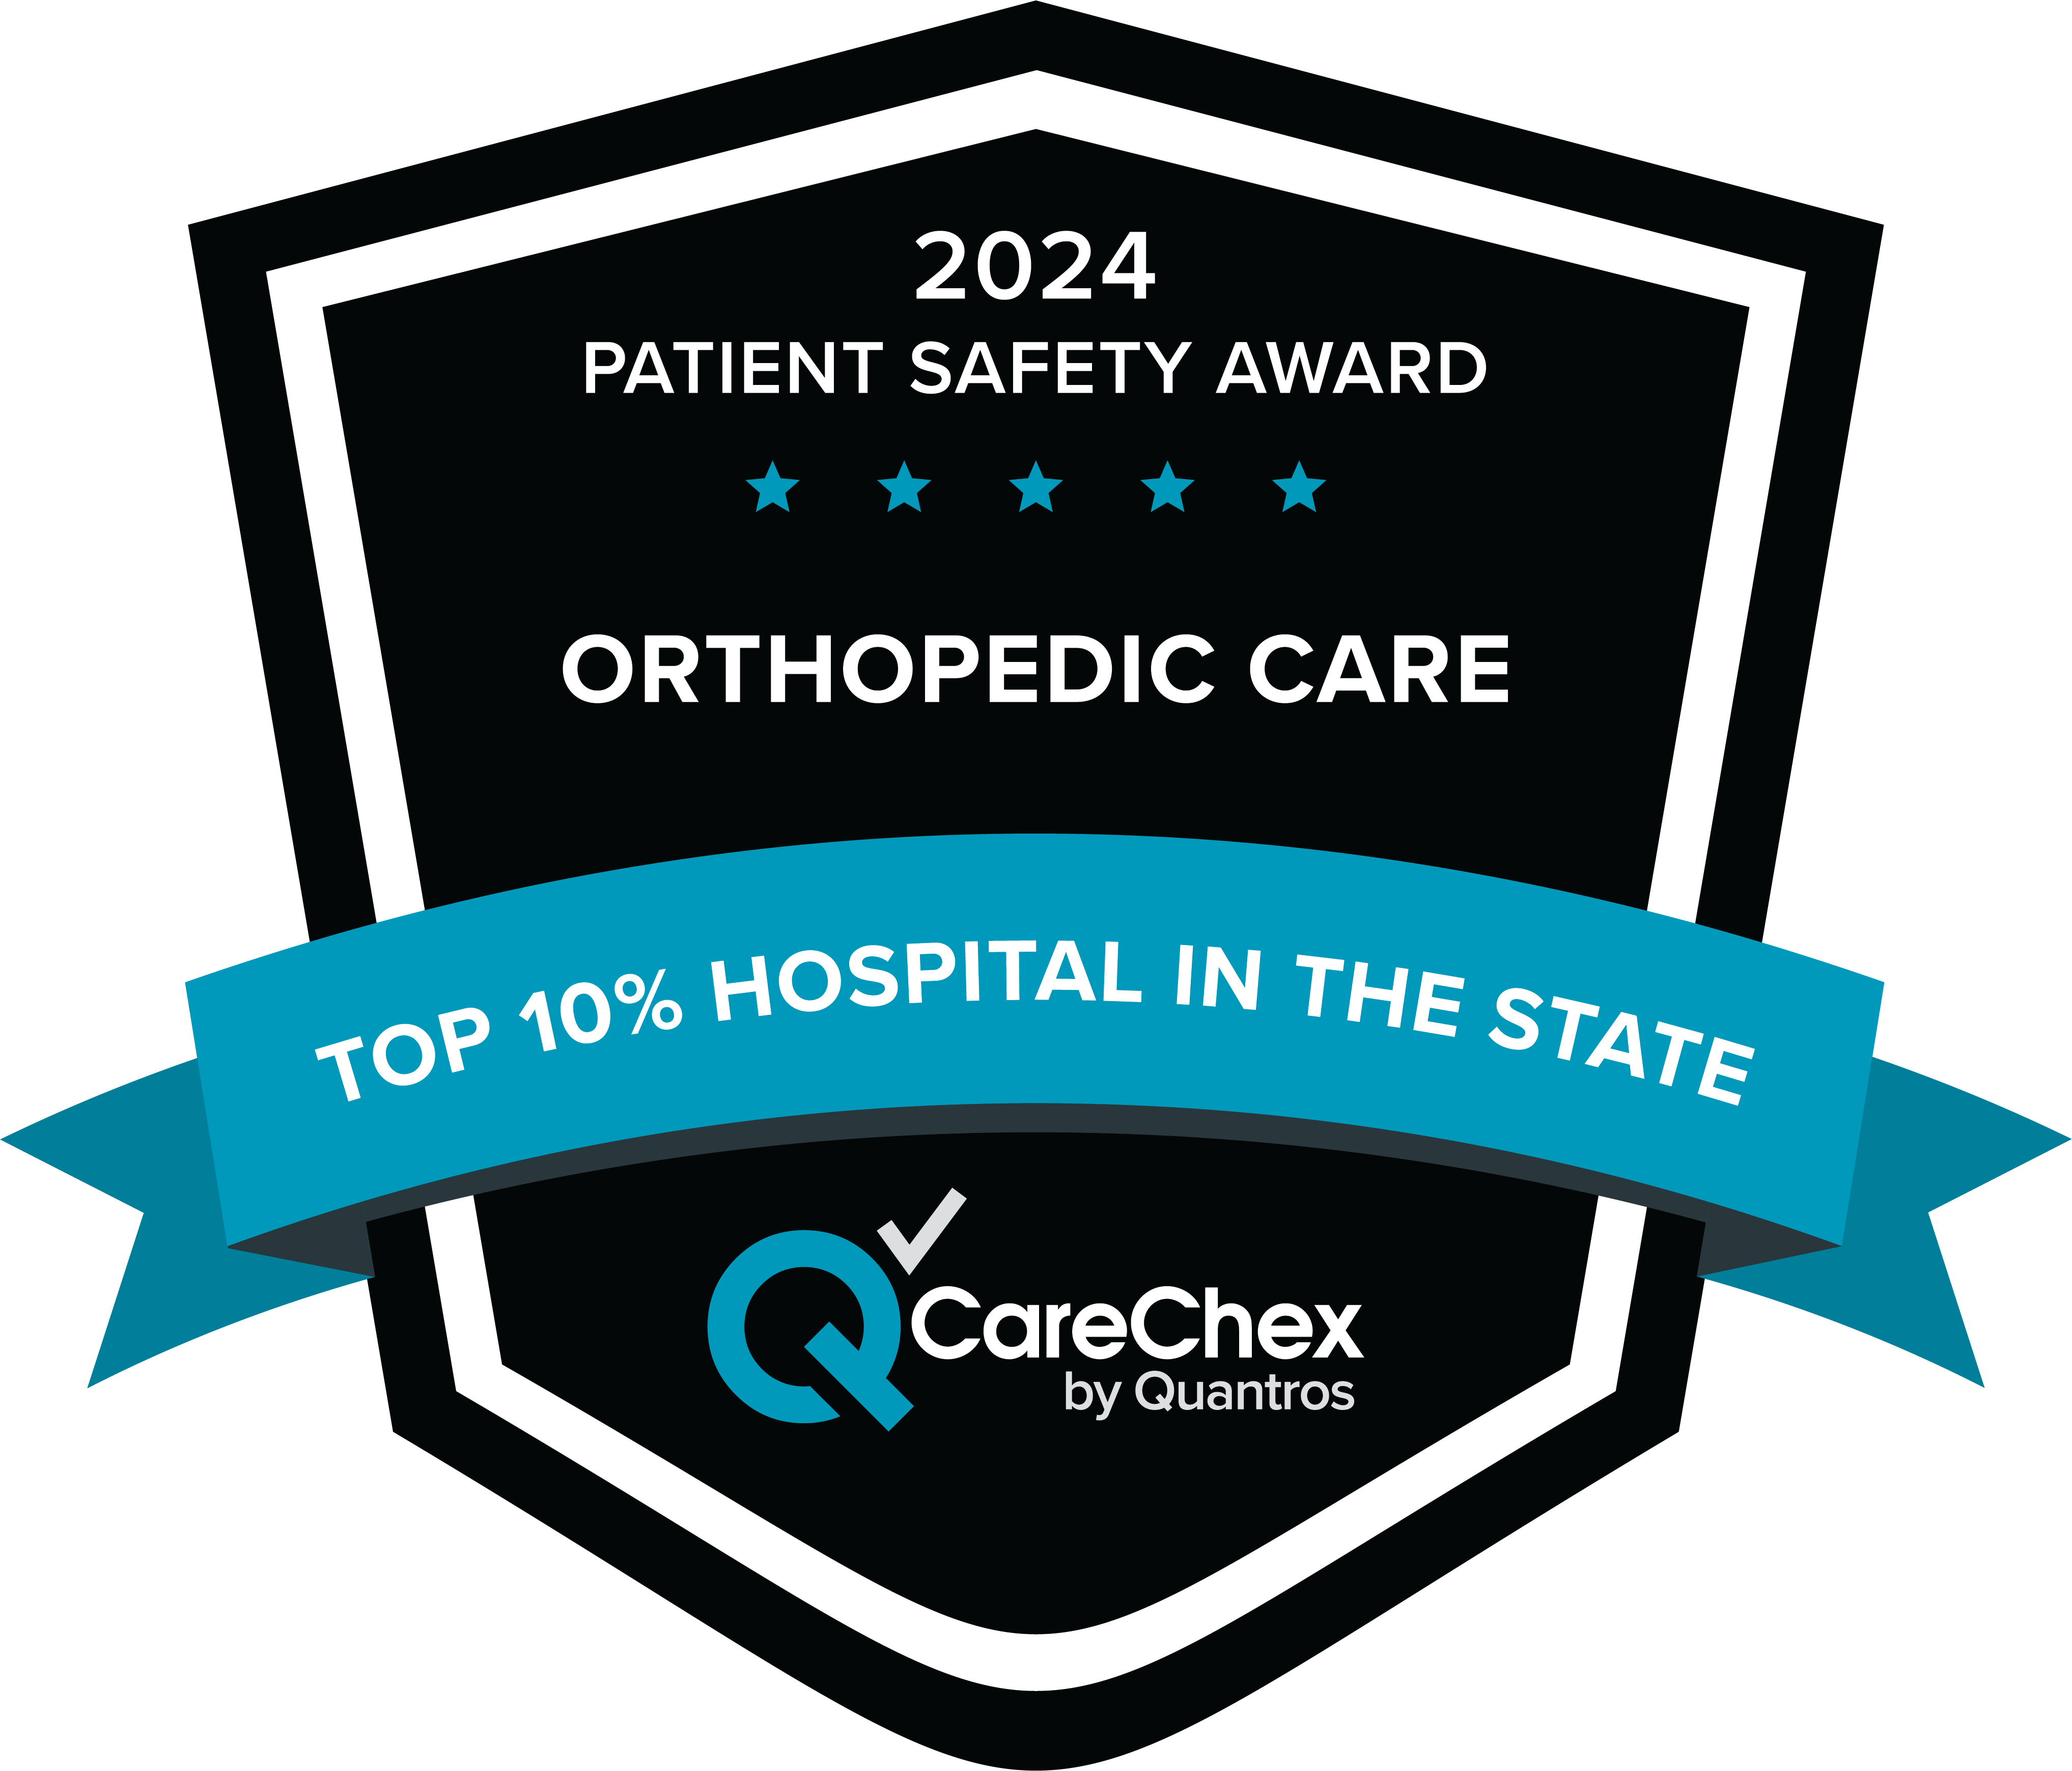 Awards badge for Top 10% Hospital in Tennessee for Patient Safety in Orthopedic Care - 2024 CareChex by Quantros